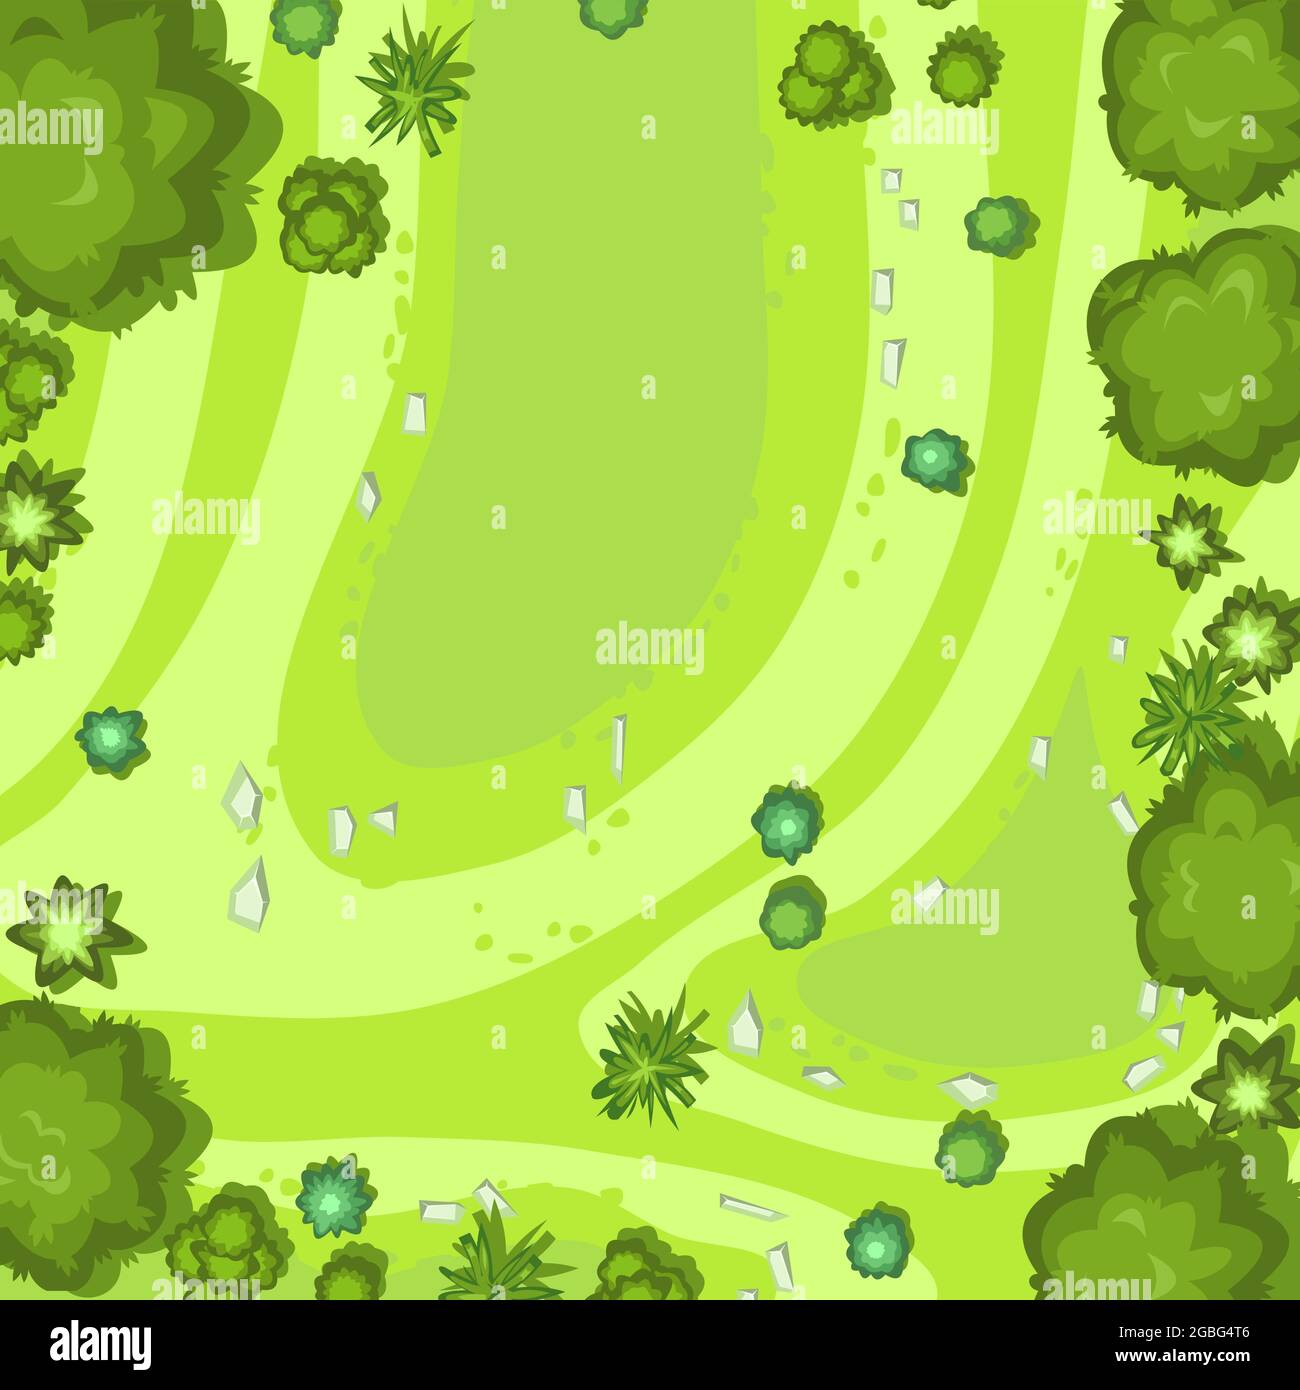 Hilly lawn in the forest. View from above. Countryside rural landscape. Green foliage of trees and shrubs. Top view. Background illustration in Stock Vector